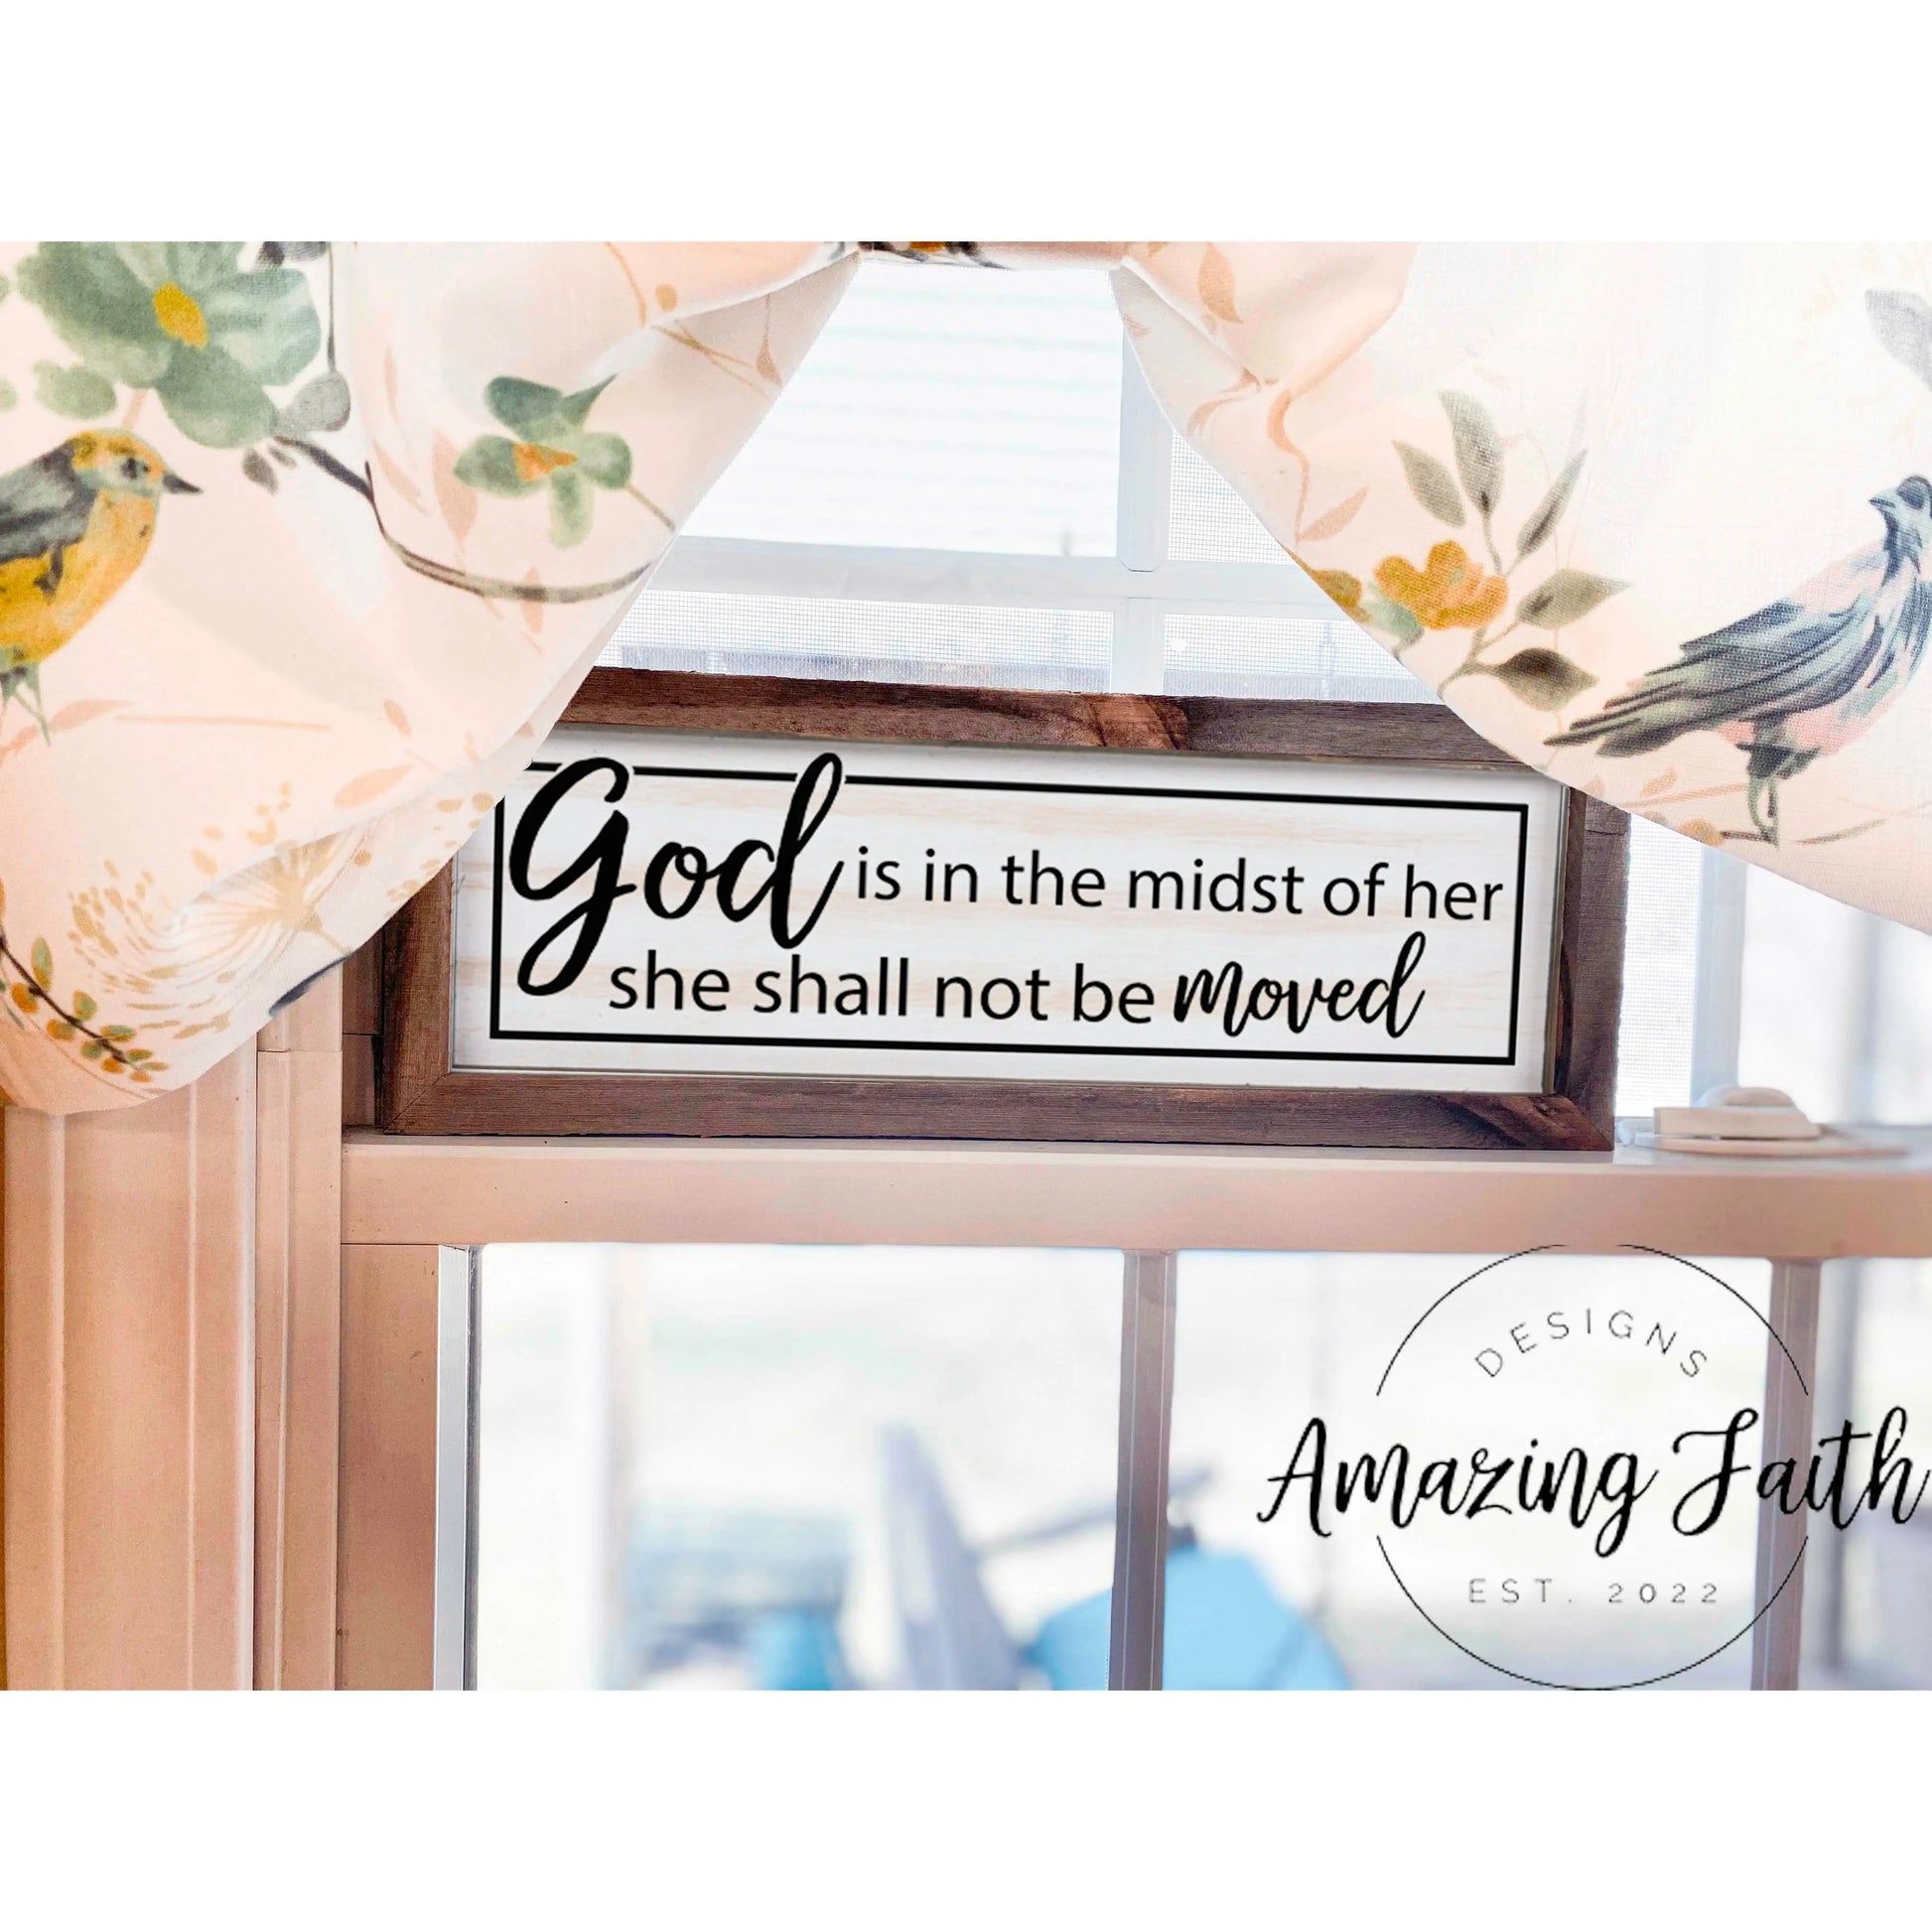 God is in the Midst of Her She Shall Not Be Moved Rustic Whitewash Wood Frame Sign | 5.5" x 15" Farmhouse Decor | Teen Girl, Daughter, Dorm Sign amazingfaithdesigns